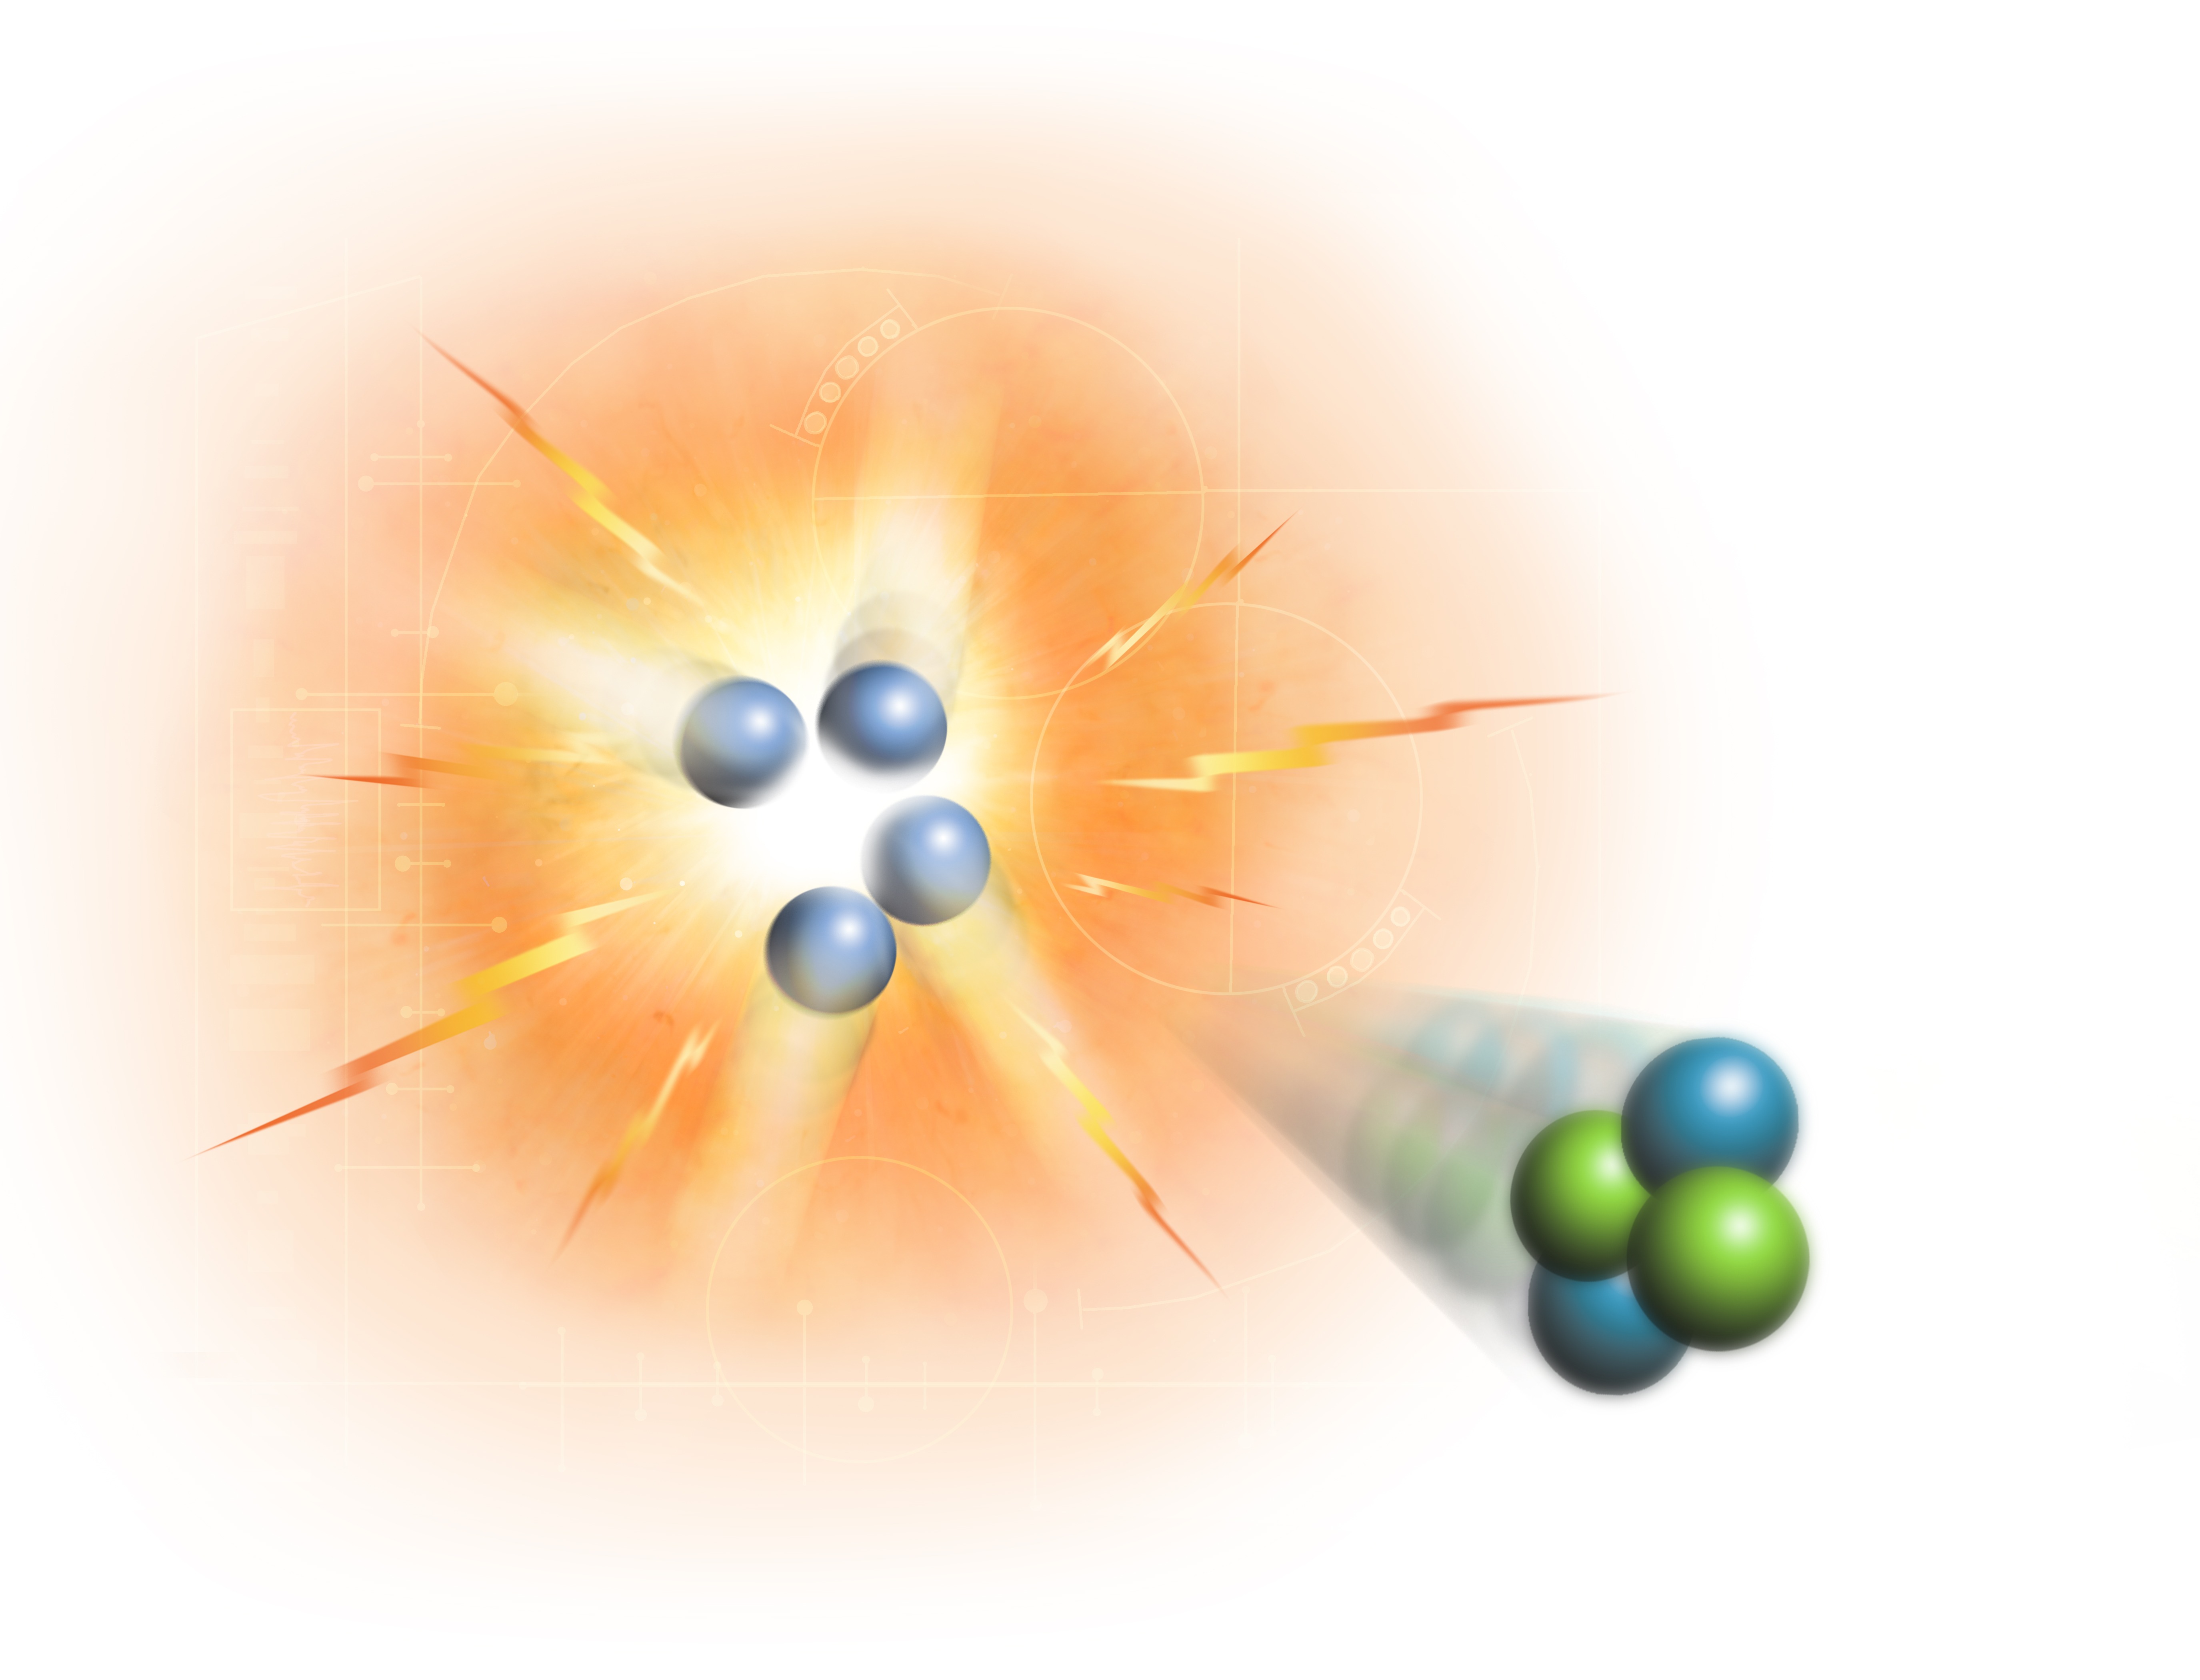 An illustration of the process of nuclear fusion, specifically the creation of helium from hydrogen. Four protons (hydrogen nuclei) are combining on the left, releasing in the process two protons and two neutrons (a helium nucleus).